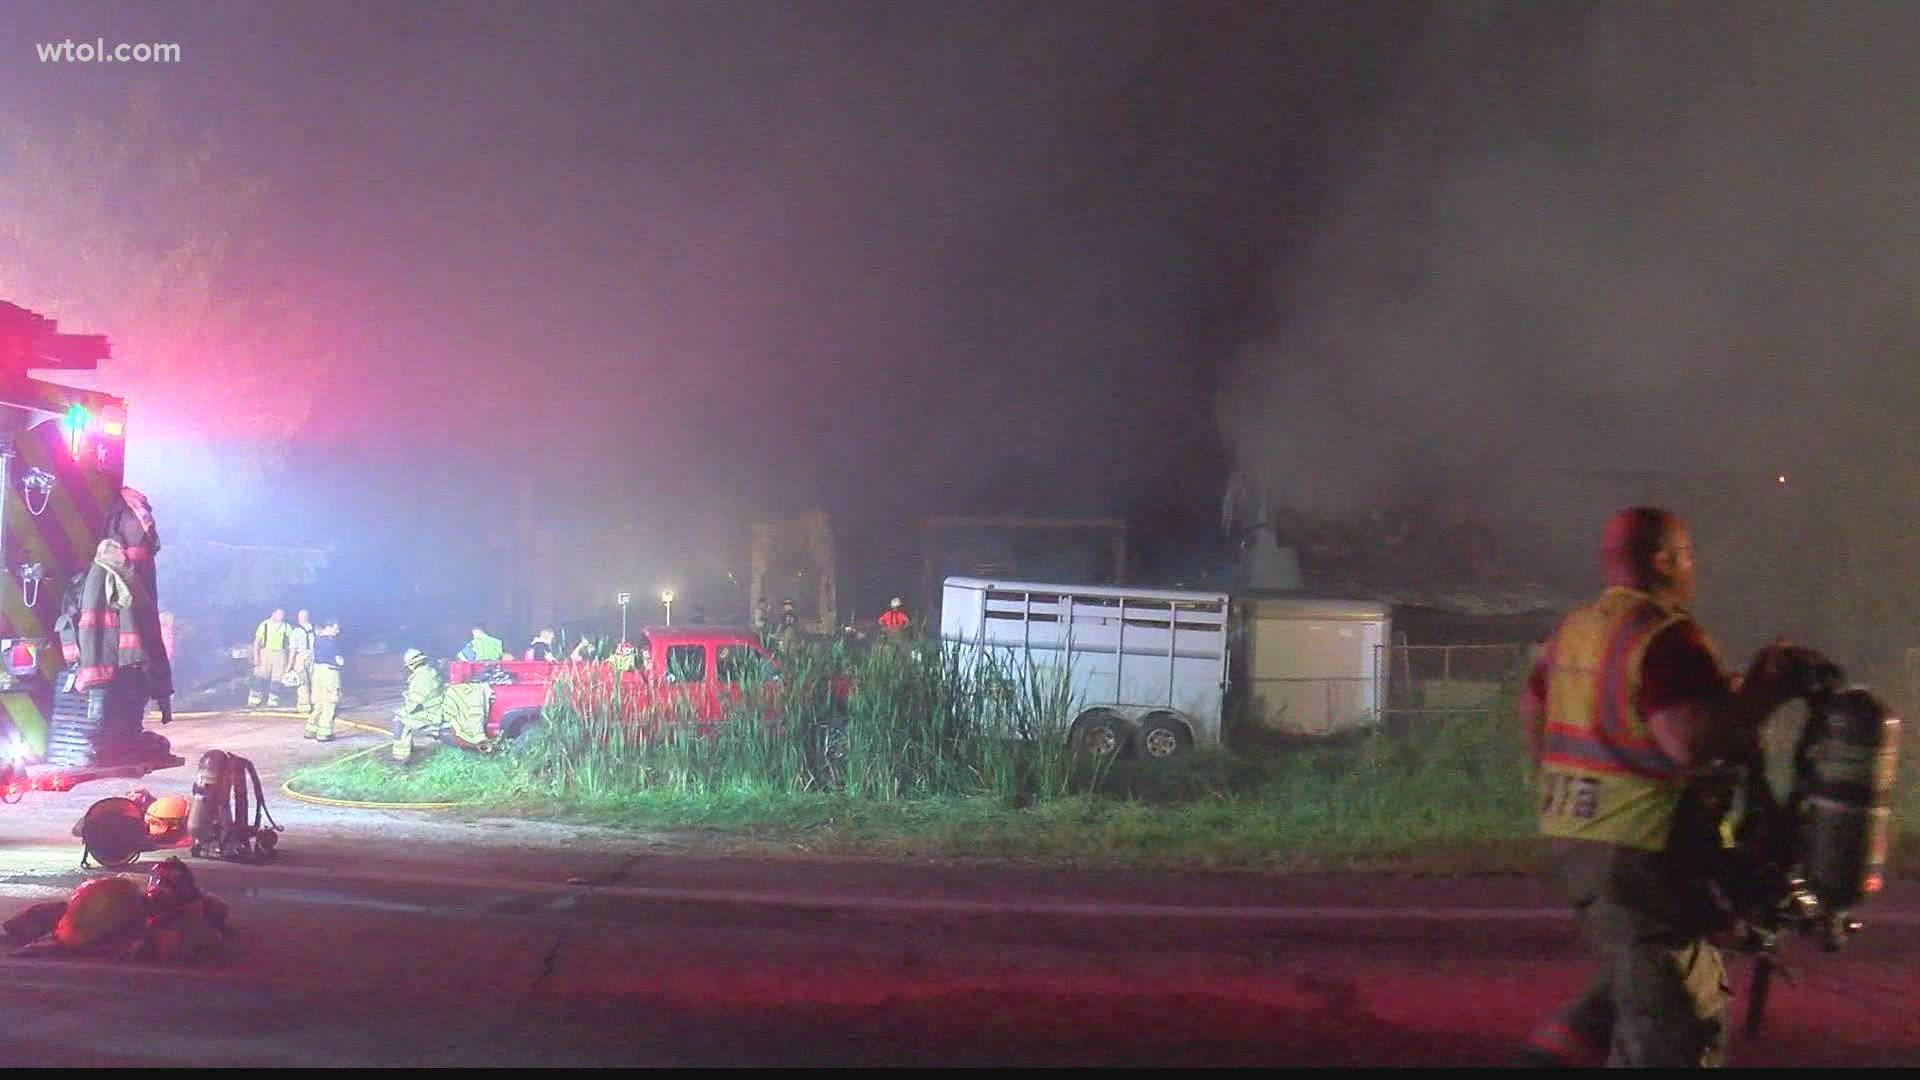 Officials say they saw cows and pigs running down the road and the barn fully engulfed in flames when they arrived at the scene of Artz's Feed & Supply.